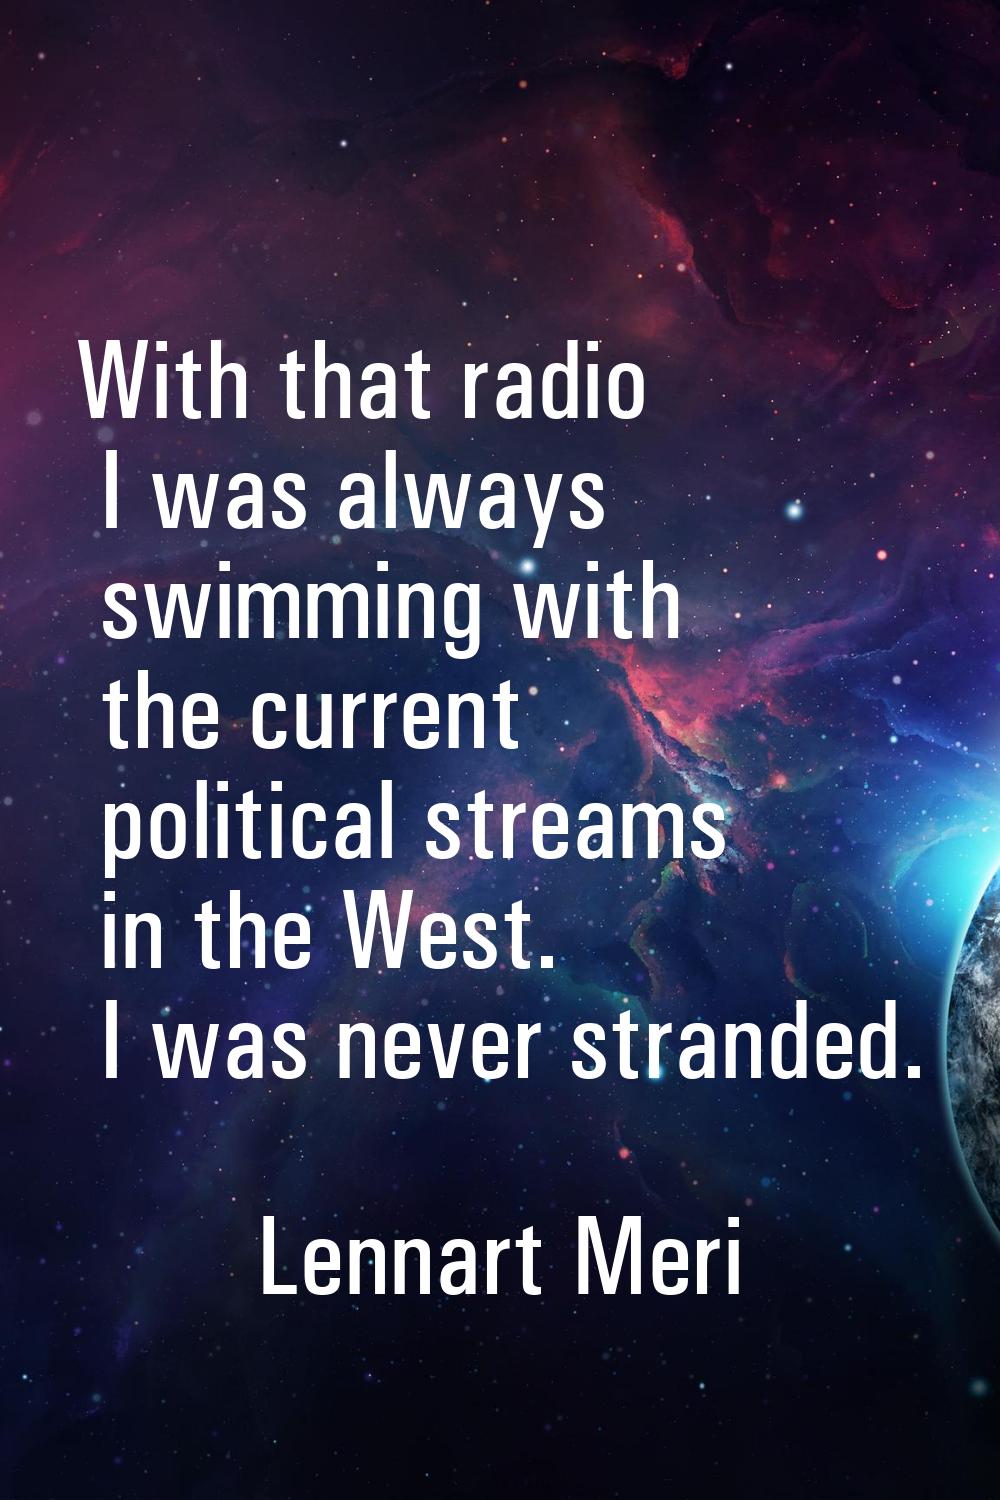 With that radio I was always swimming with the current political streams in the West. I was never s